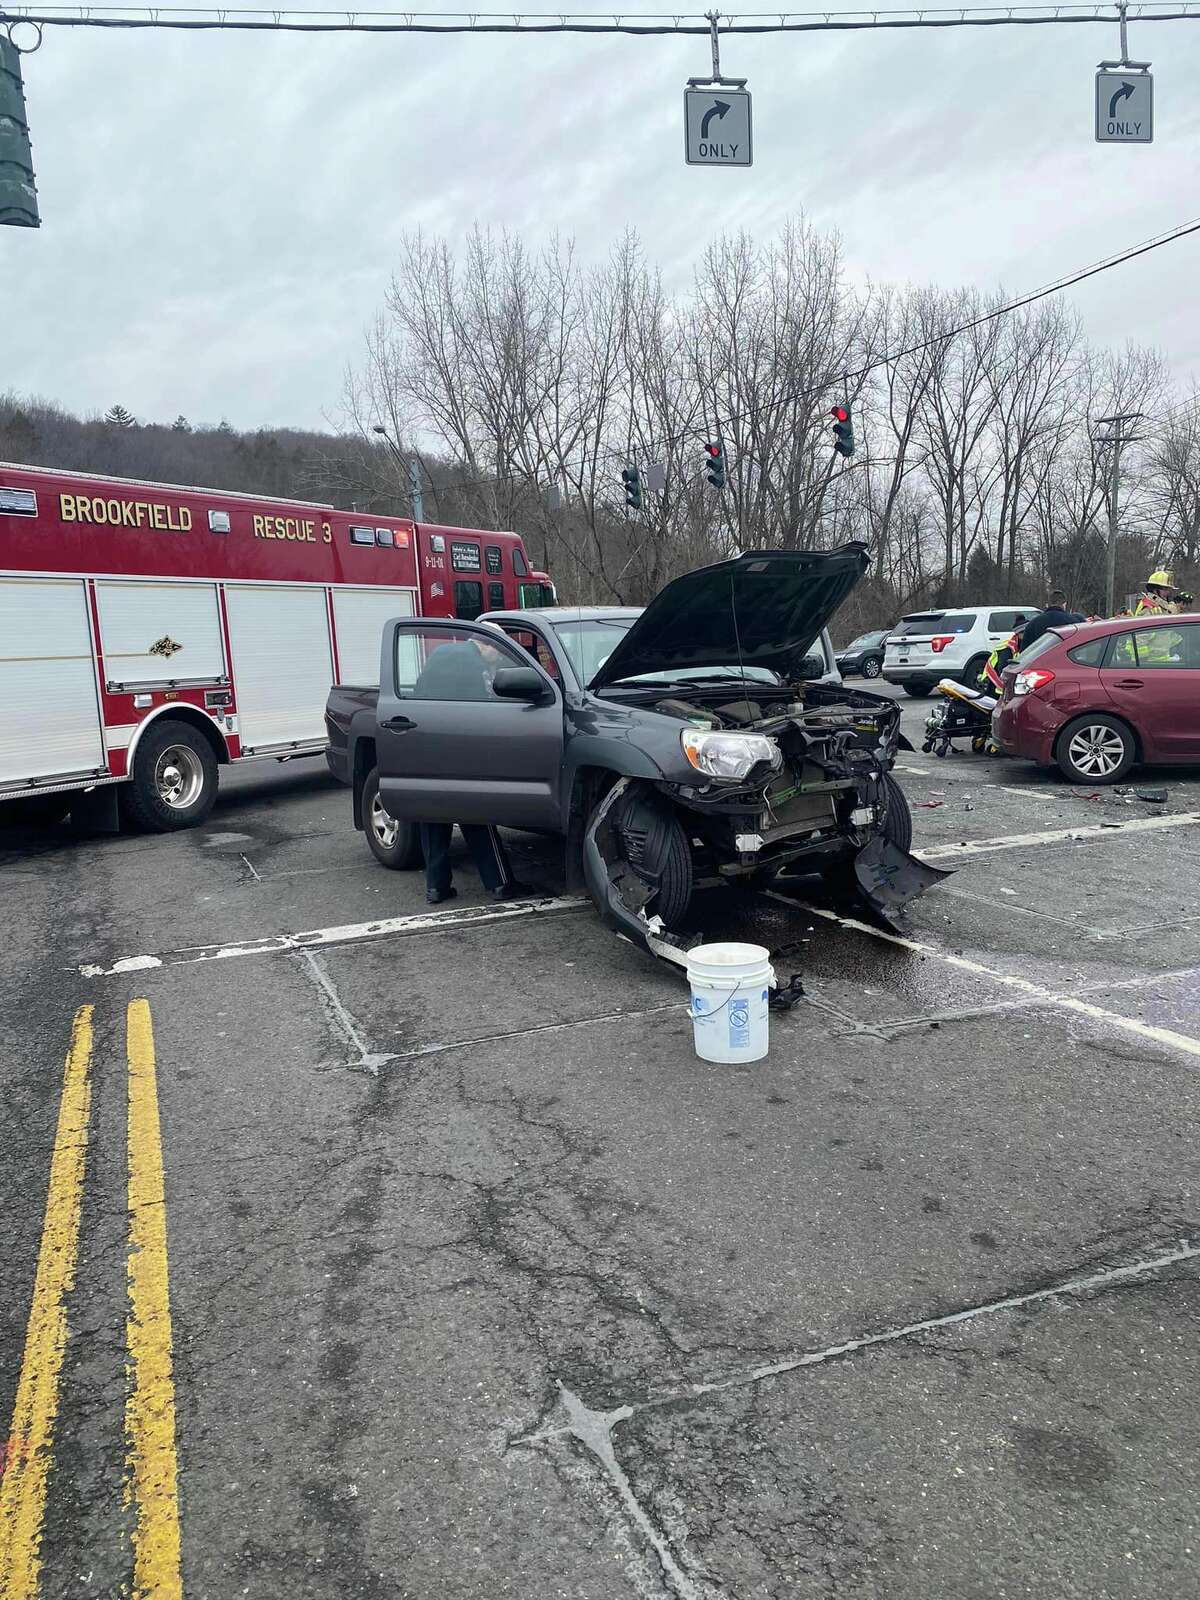 A three-car crash on Federal Road and Route 7 in Brookfield Thursday morning sent four people to the hospital, the Brookfield Volunteer Fire Company said.